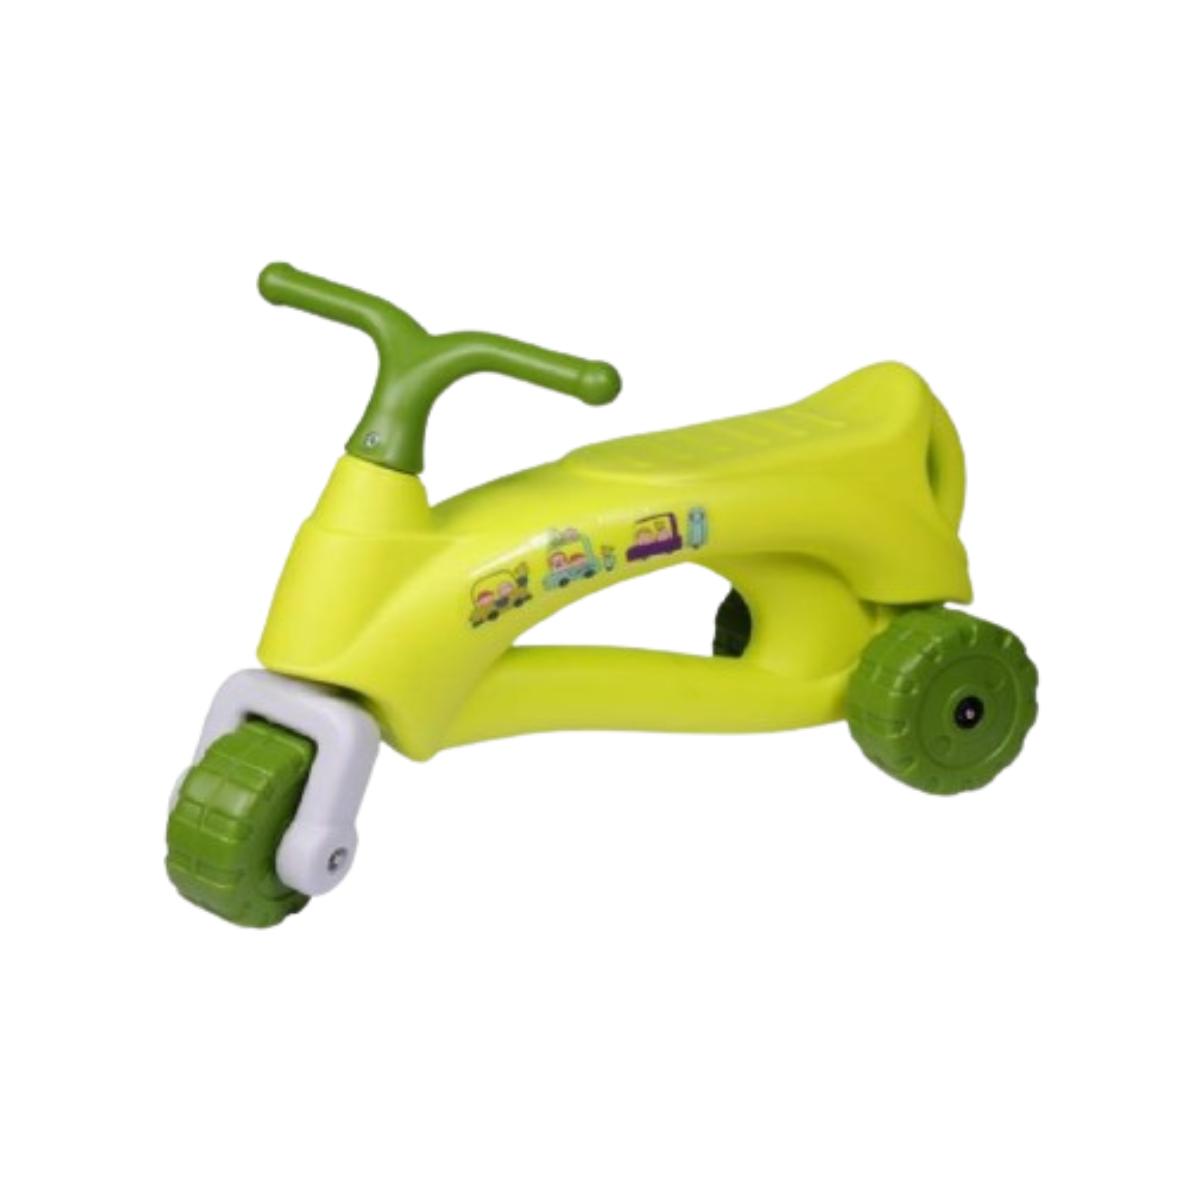 Ching Ching -Baby, toodler Horn march walker with black wheels -Green